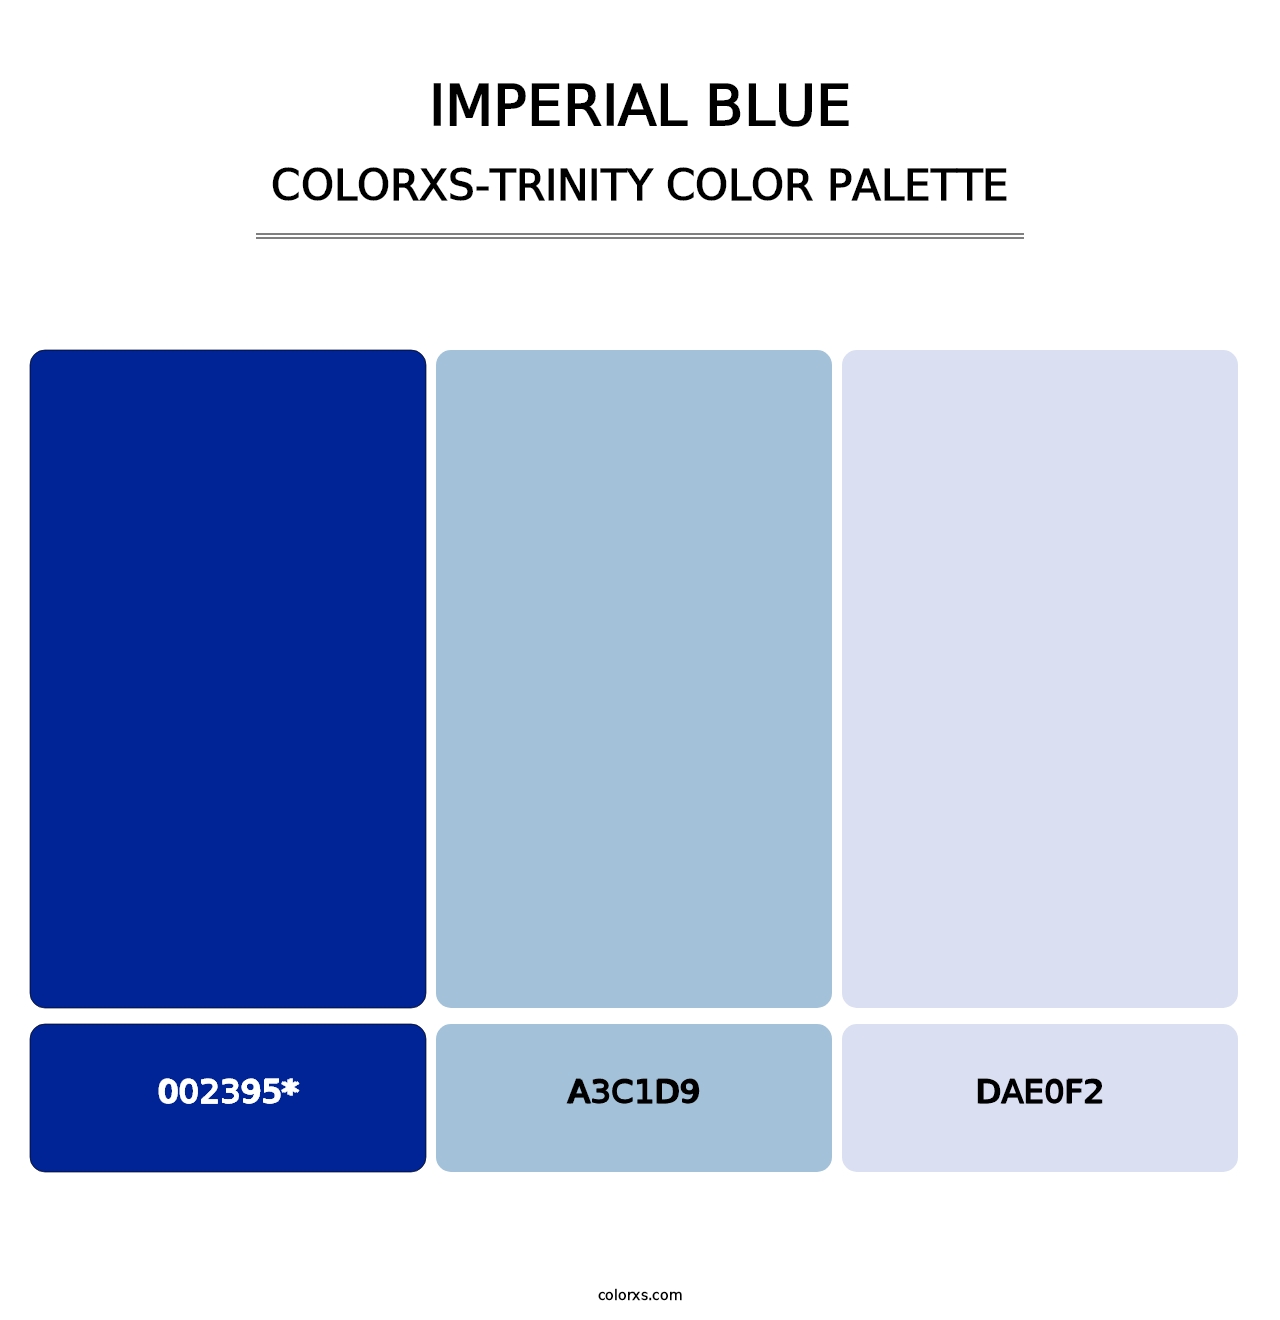 Imperial Blue - Colorxs Trinity Palette